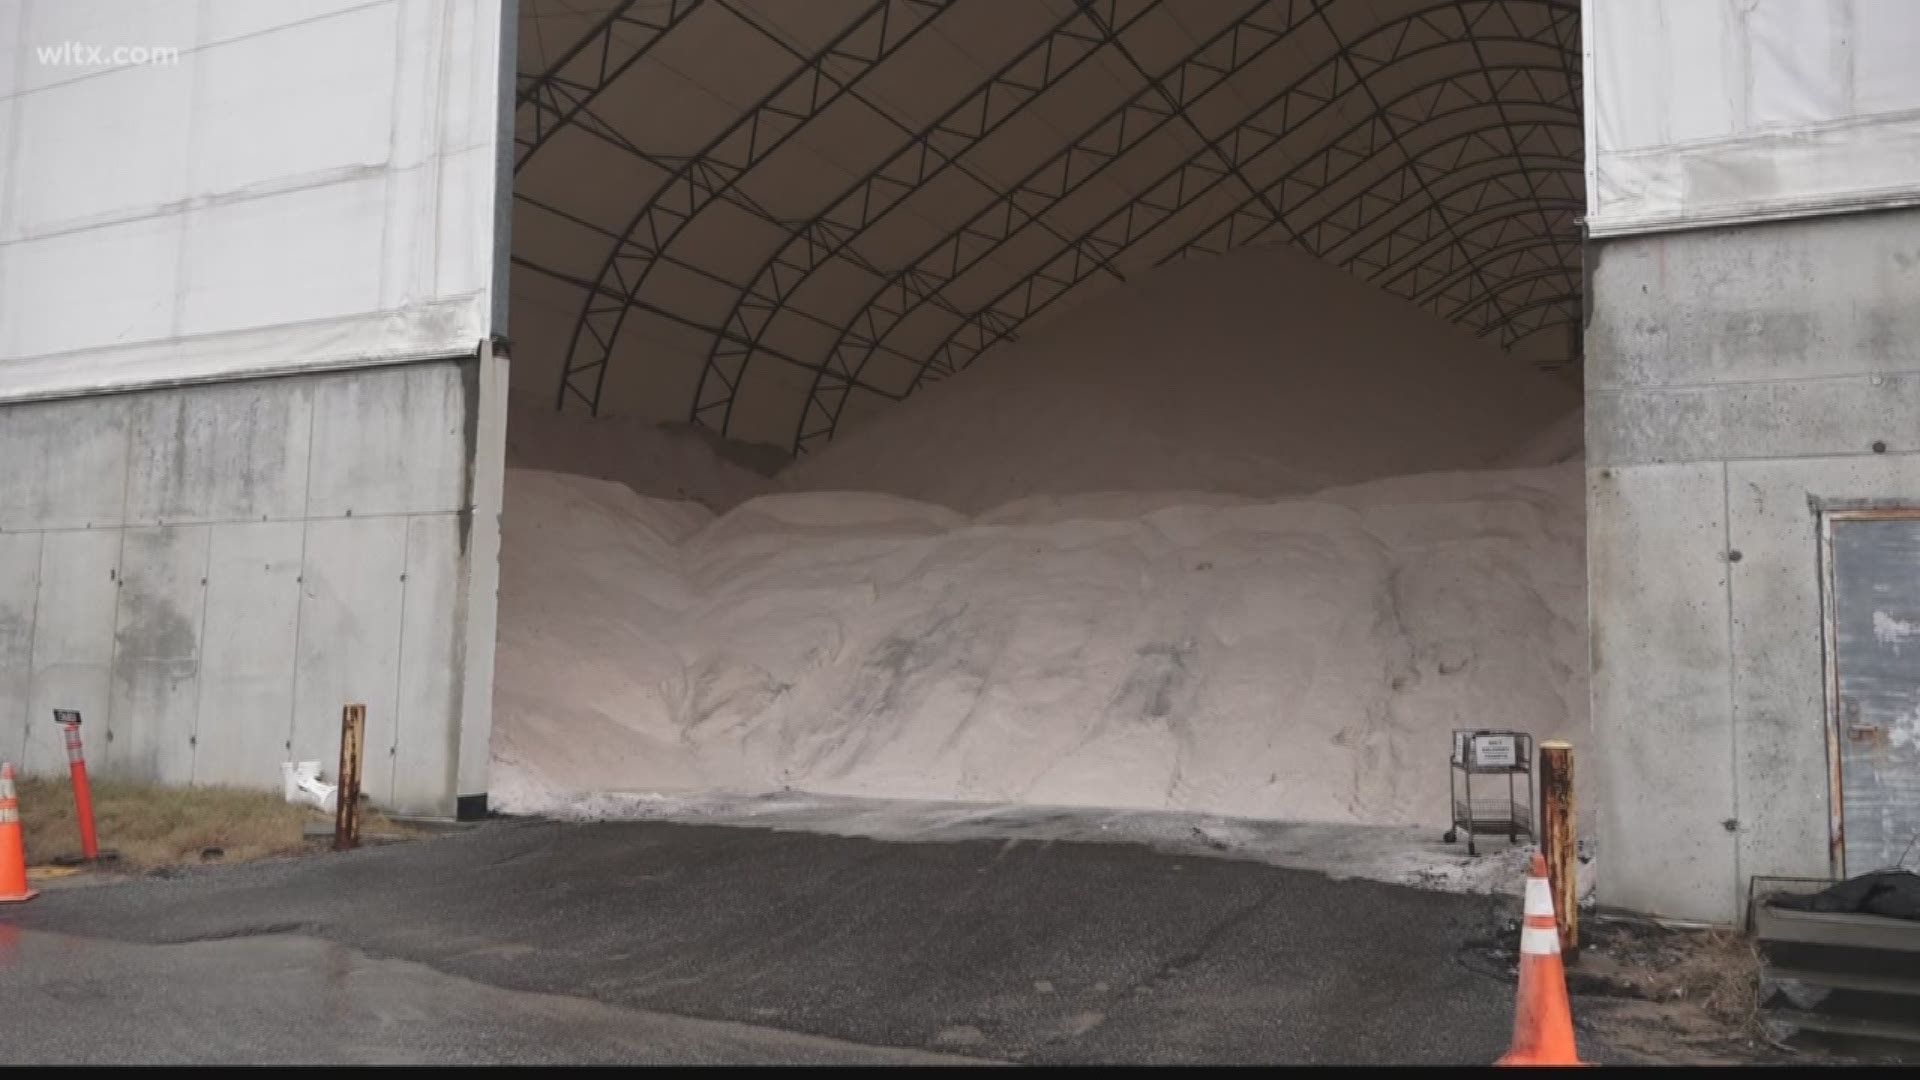 The most snow in South Carolina dropped in the Spartanburg county town of Inman...where they saw a foot of snow.